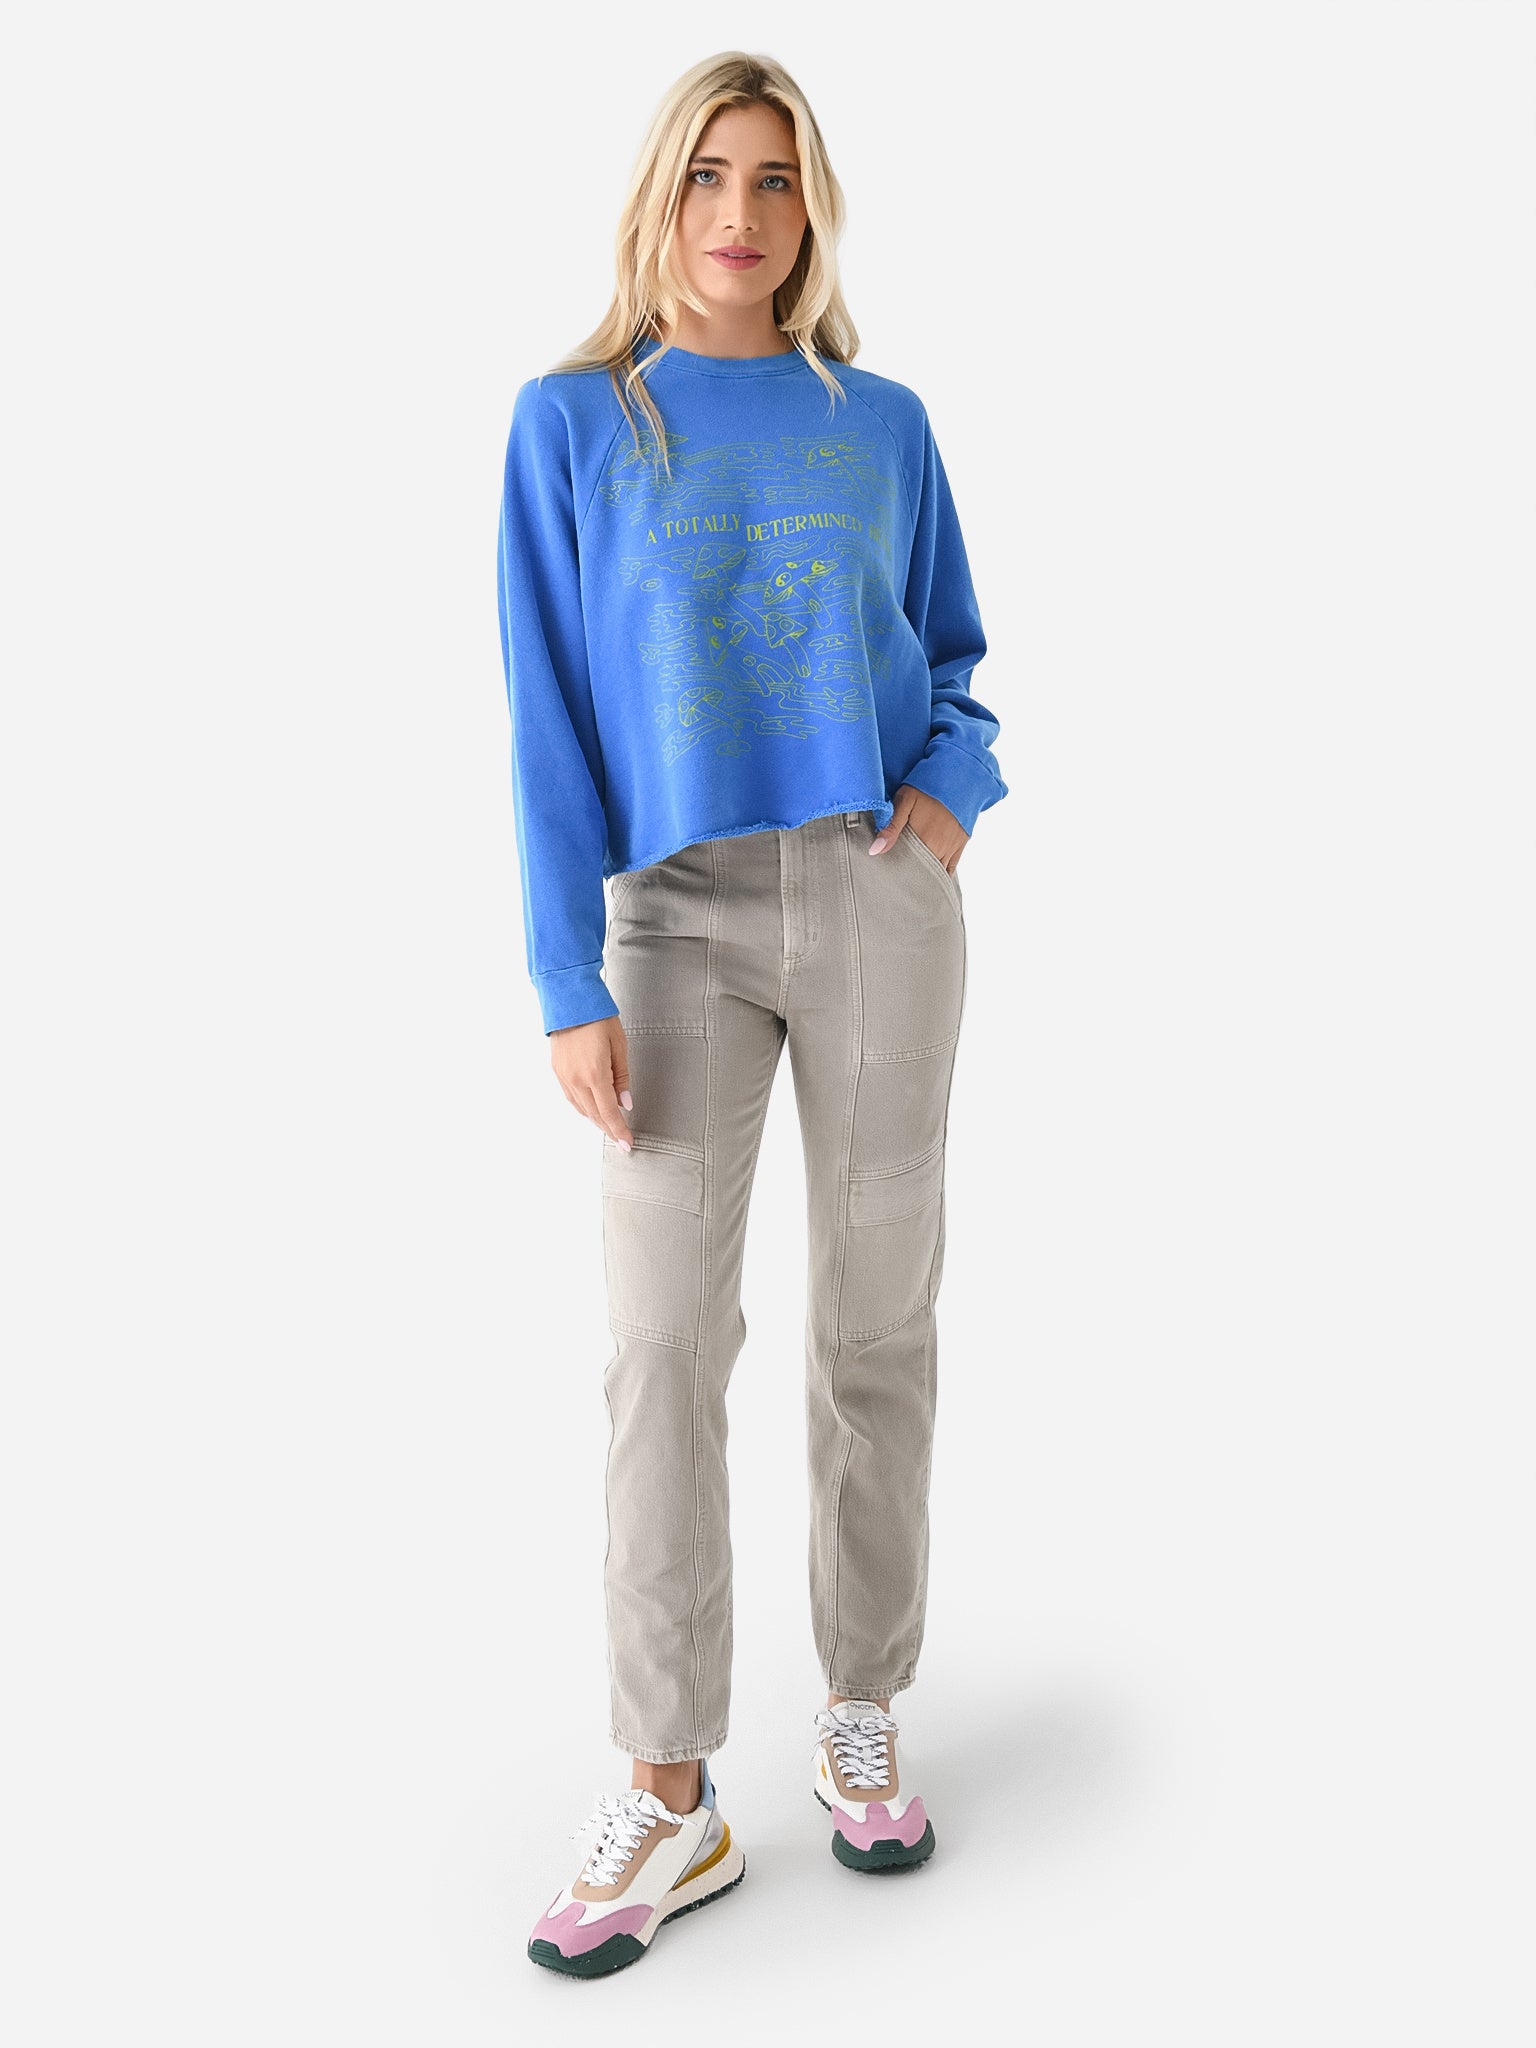 Don't Tuck With Us Crop Sweatshirt - BarreAmped®